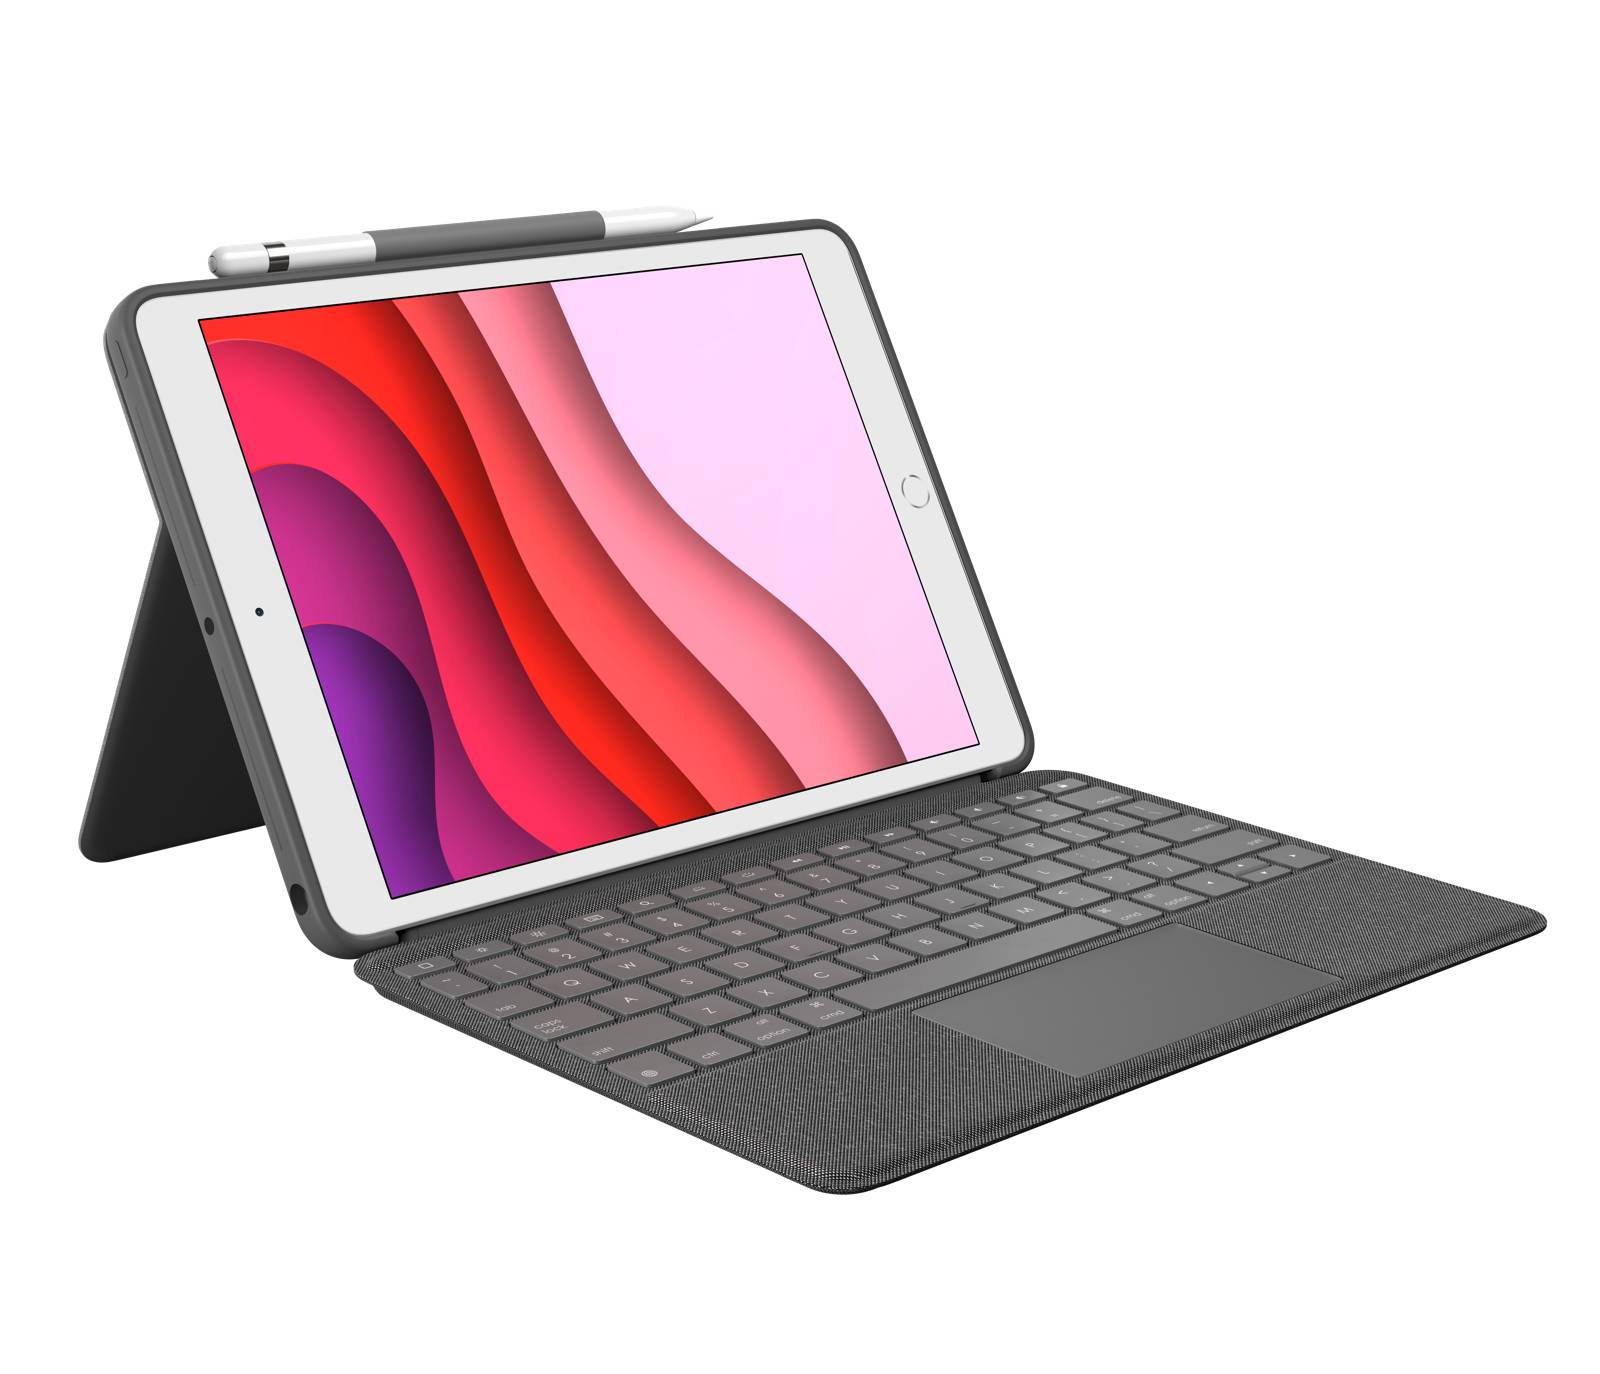 Rca Informatique - Image du produit : COMBO TOUCH F/ IPAD 7TH AND 8TH GENERATION GRAPHITE FRA CENTRAL